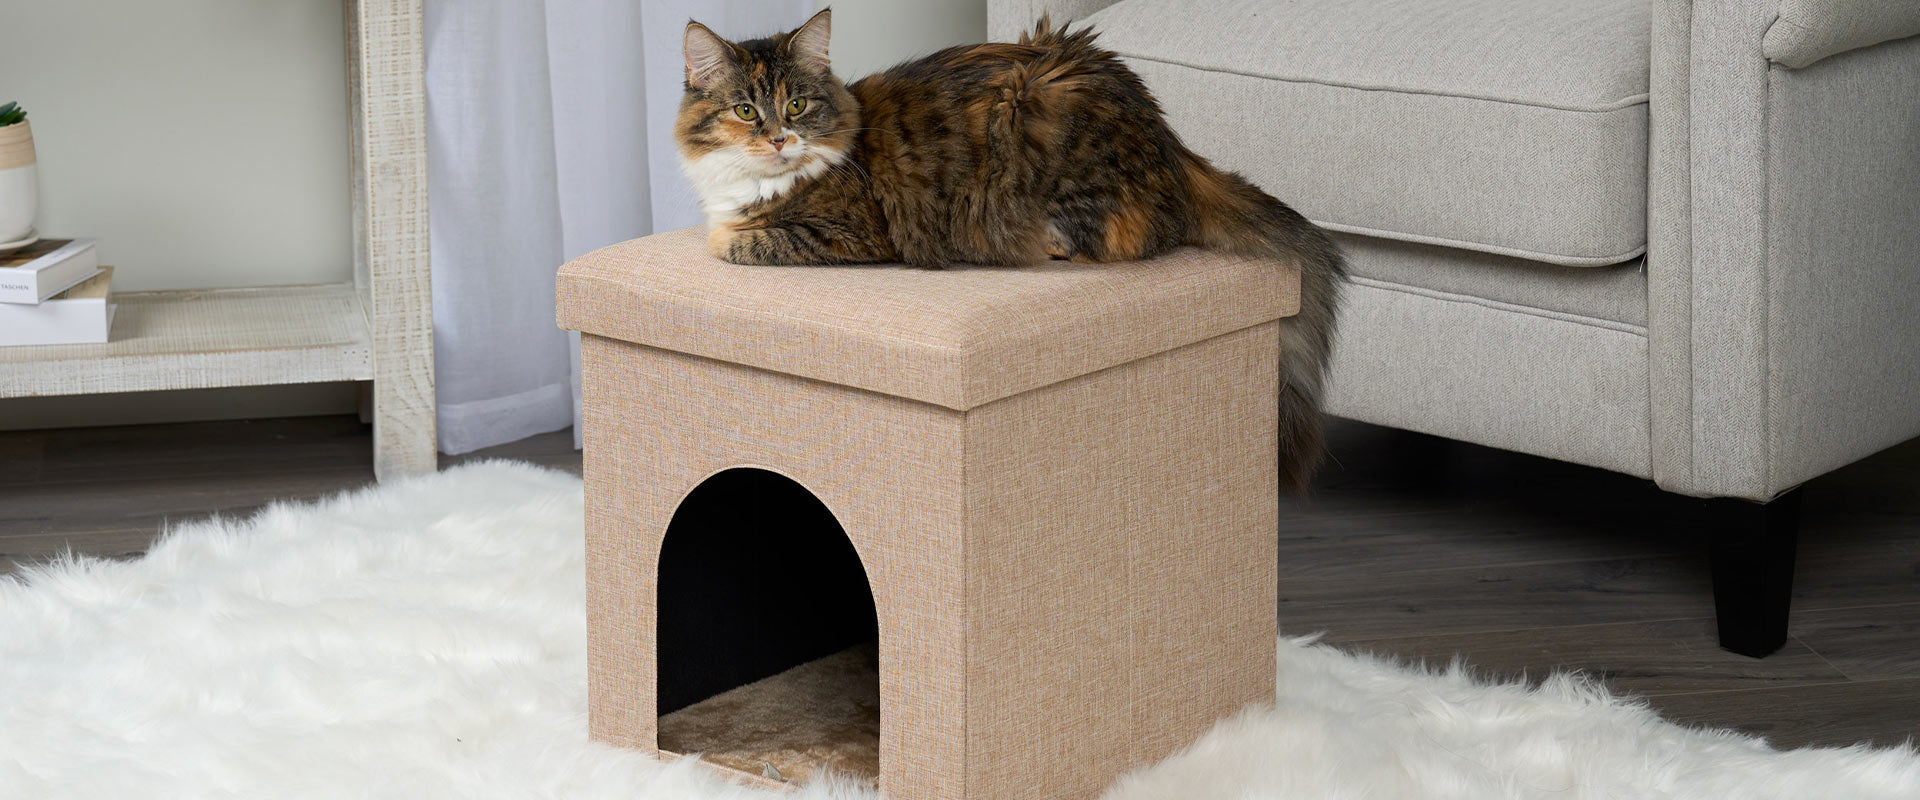 Sand Color Footstool with a young calico cat resting on top.